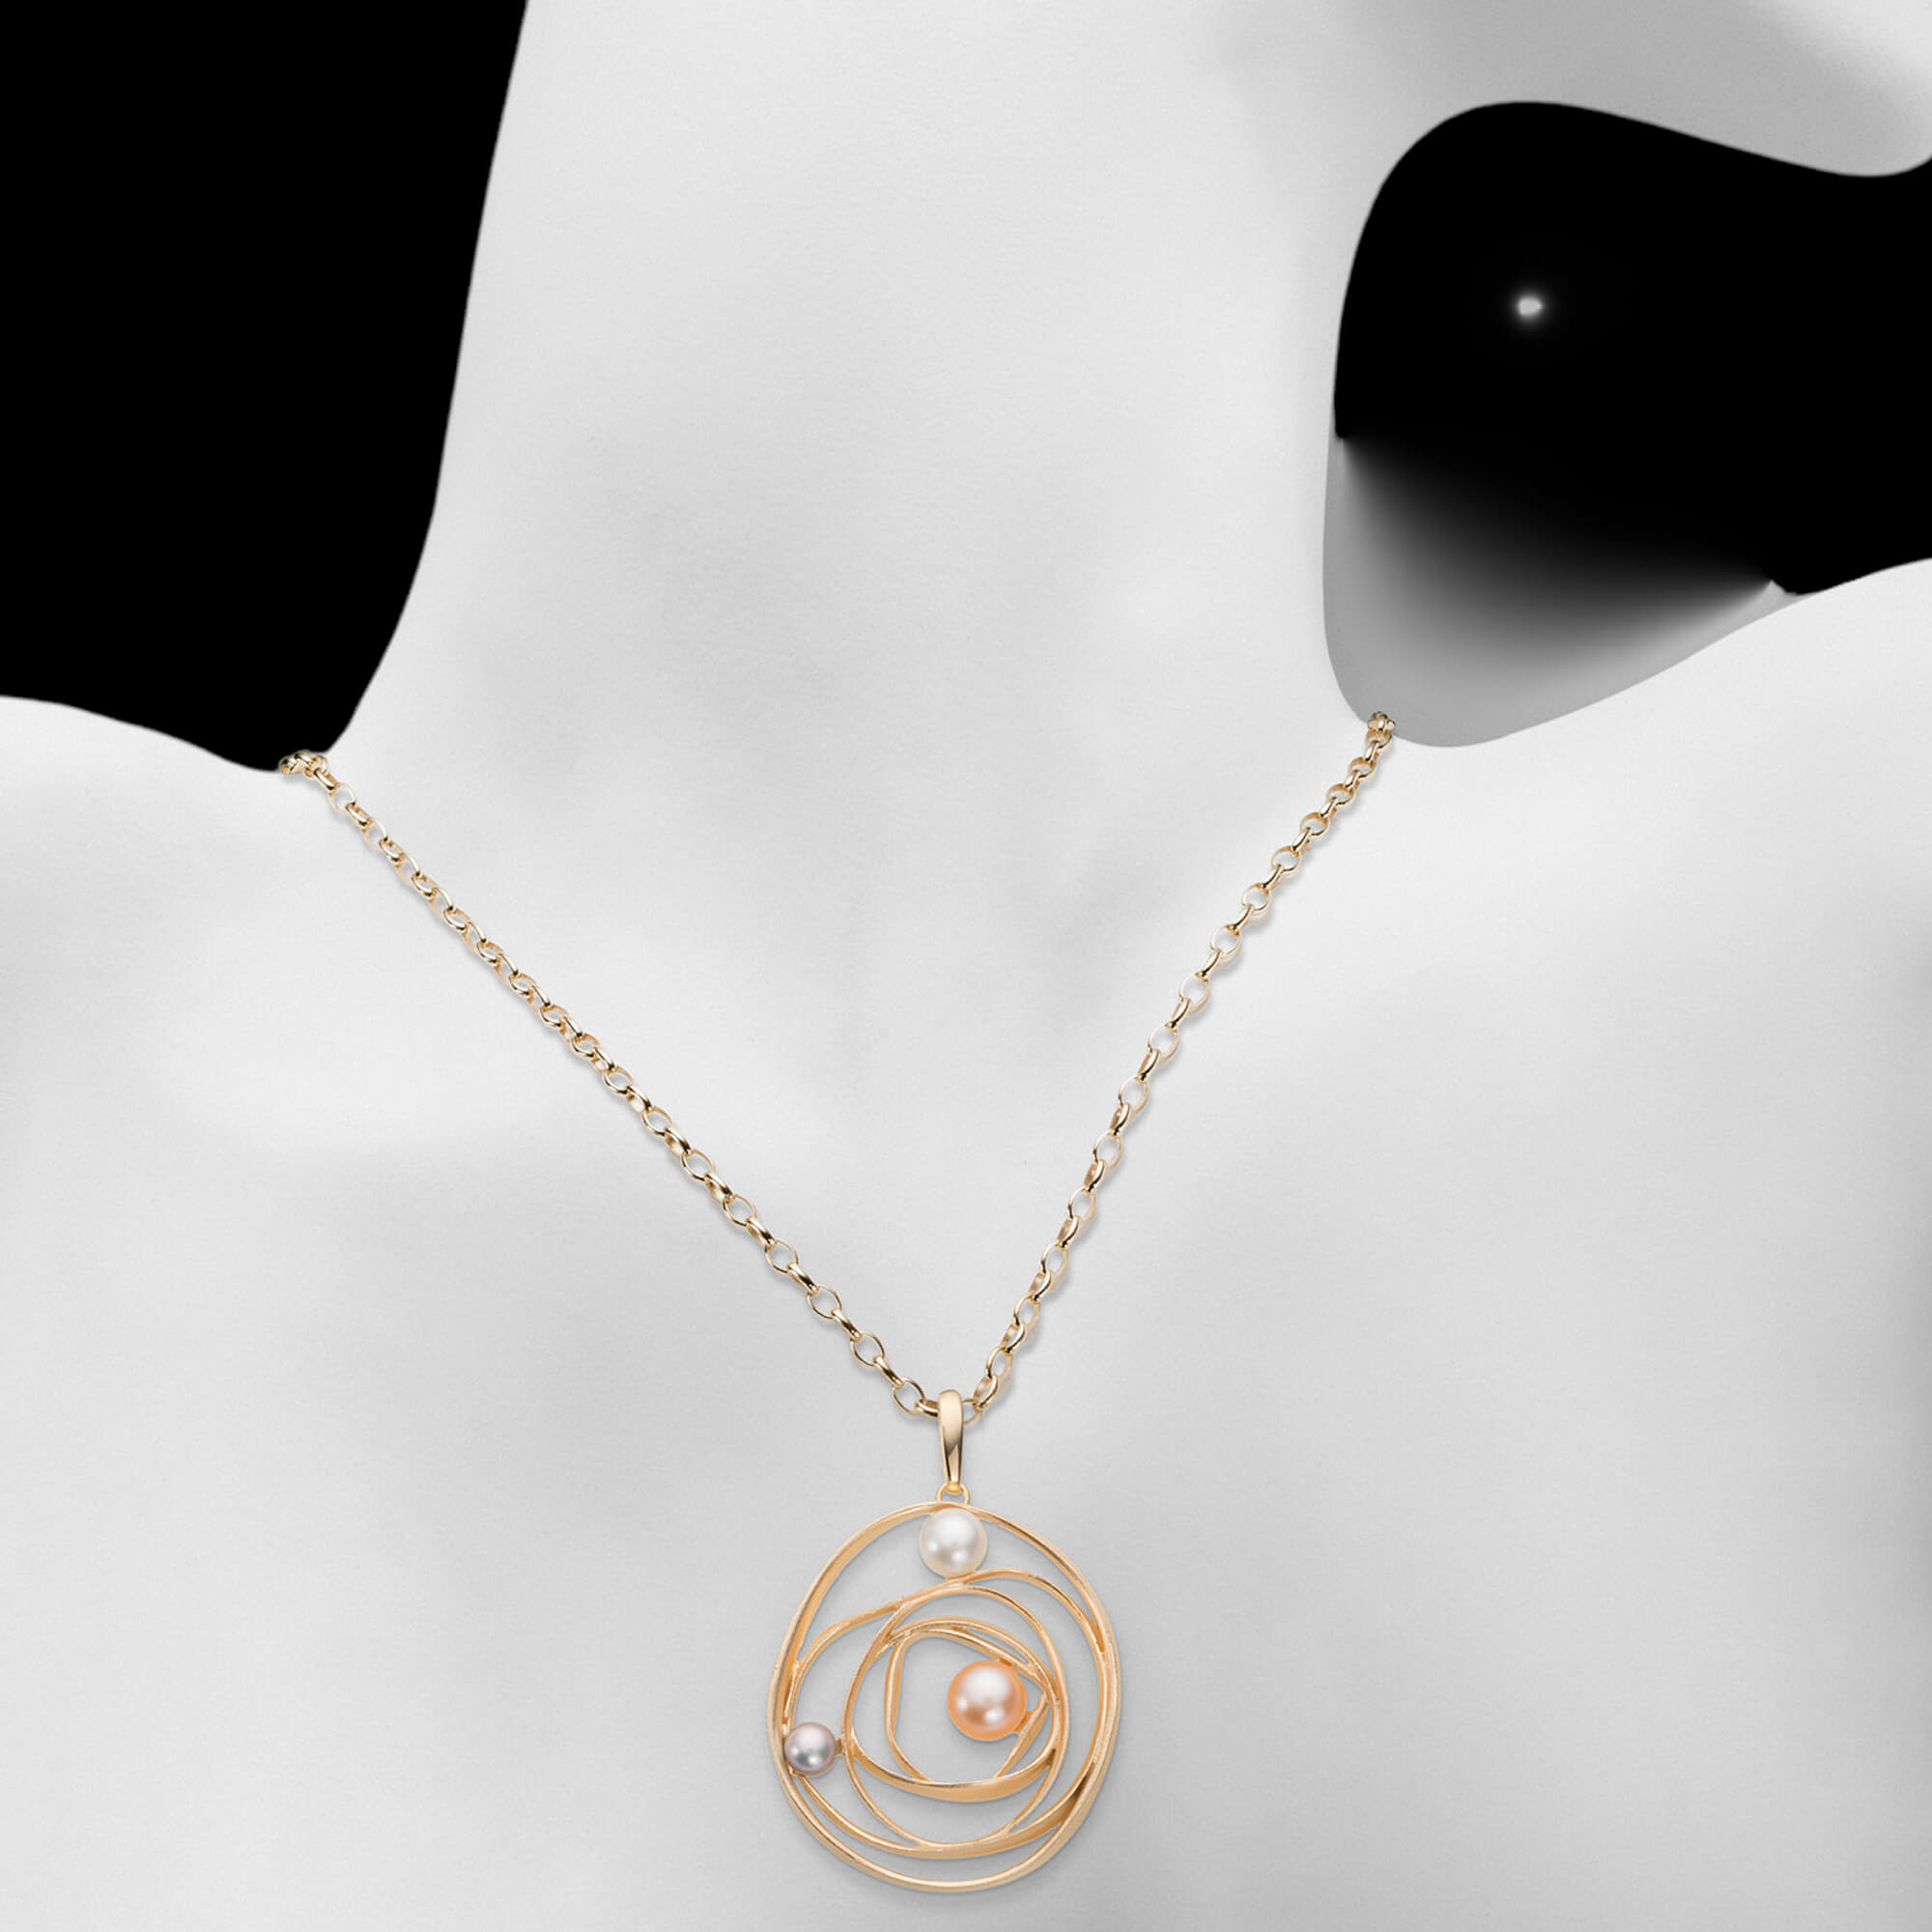 Magnificent large gold-plated pendant with freshwater pearls